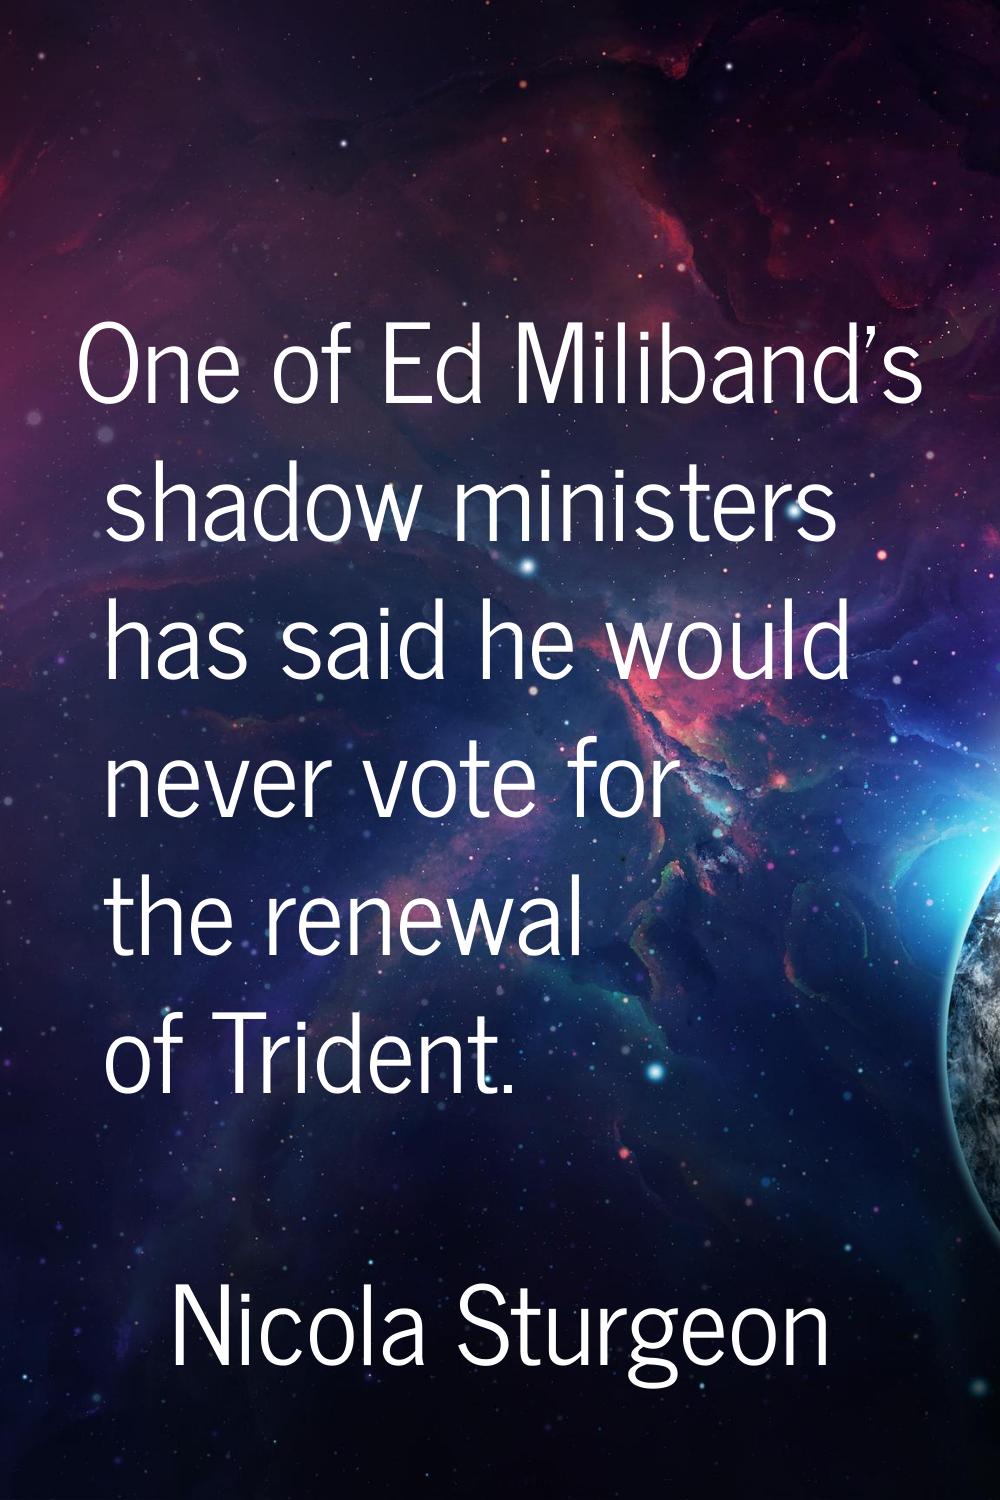 One of Ed Miliband's shadow ministers has said he would never vote for the renewal of Trident.